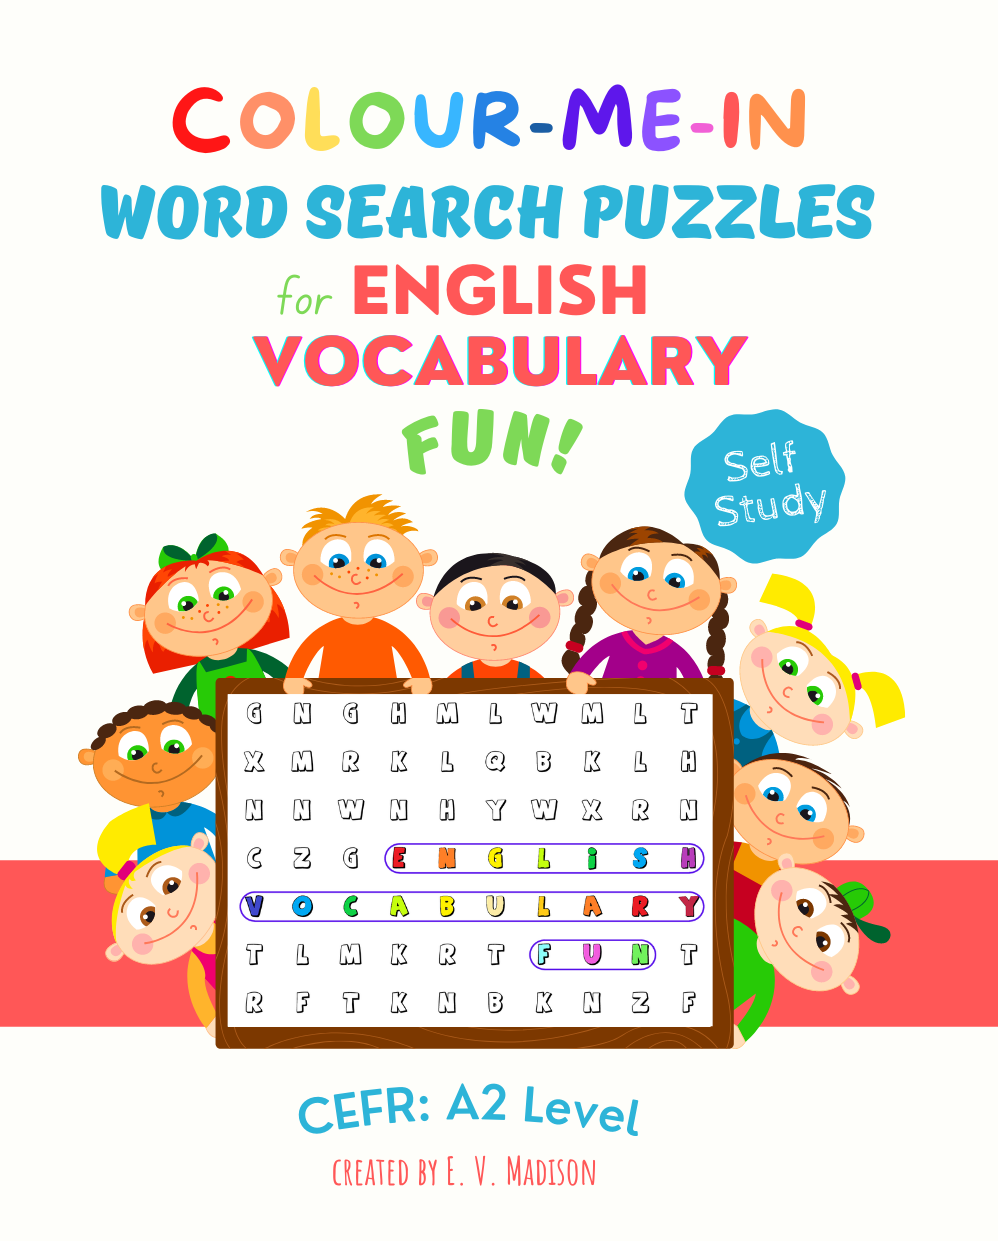 Colour-Me-In Word Search Puzzles for English Vocabulary Fun! A2 Level